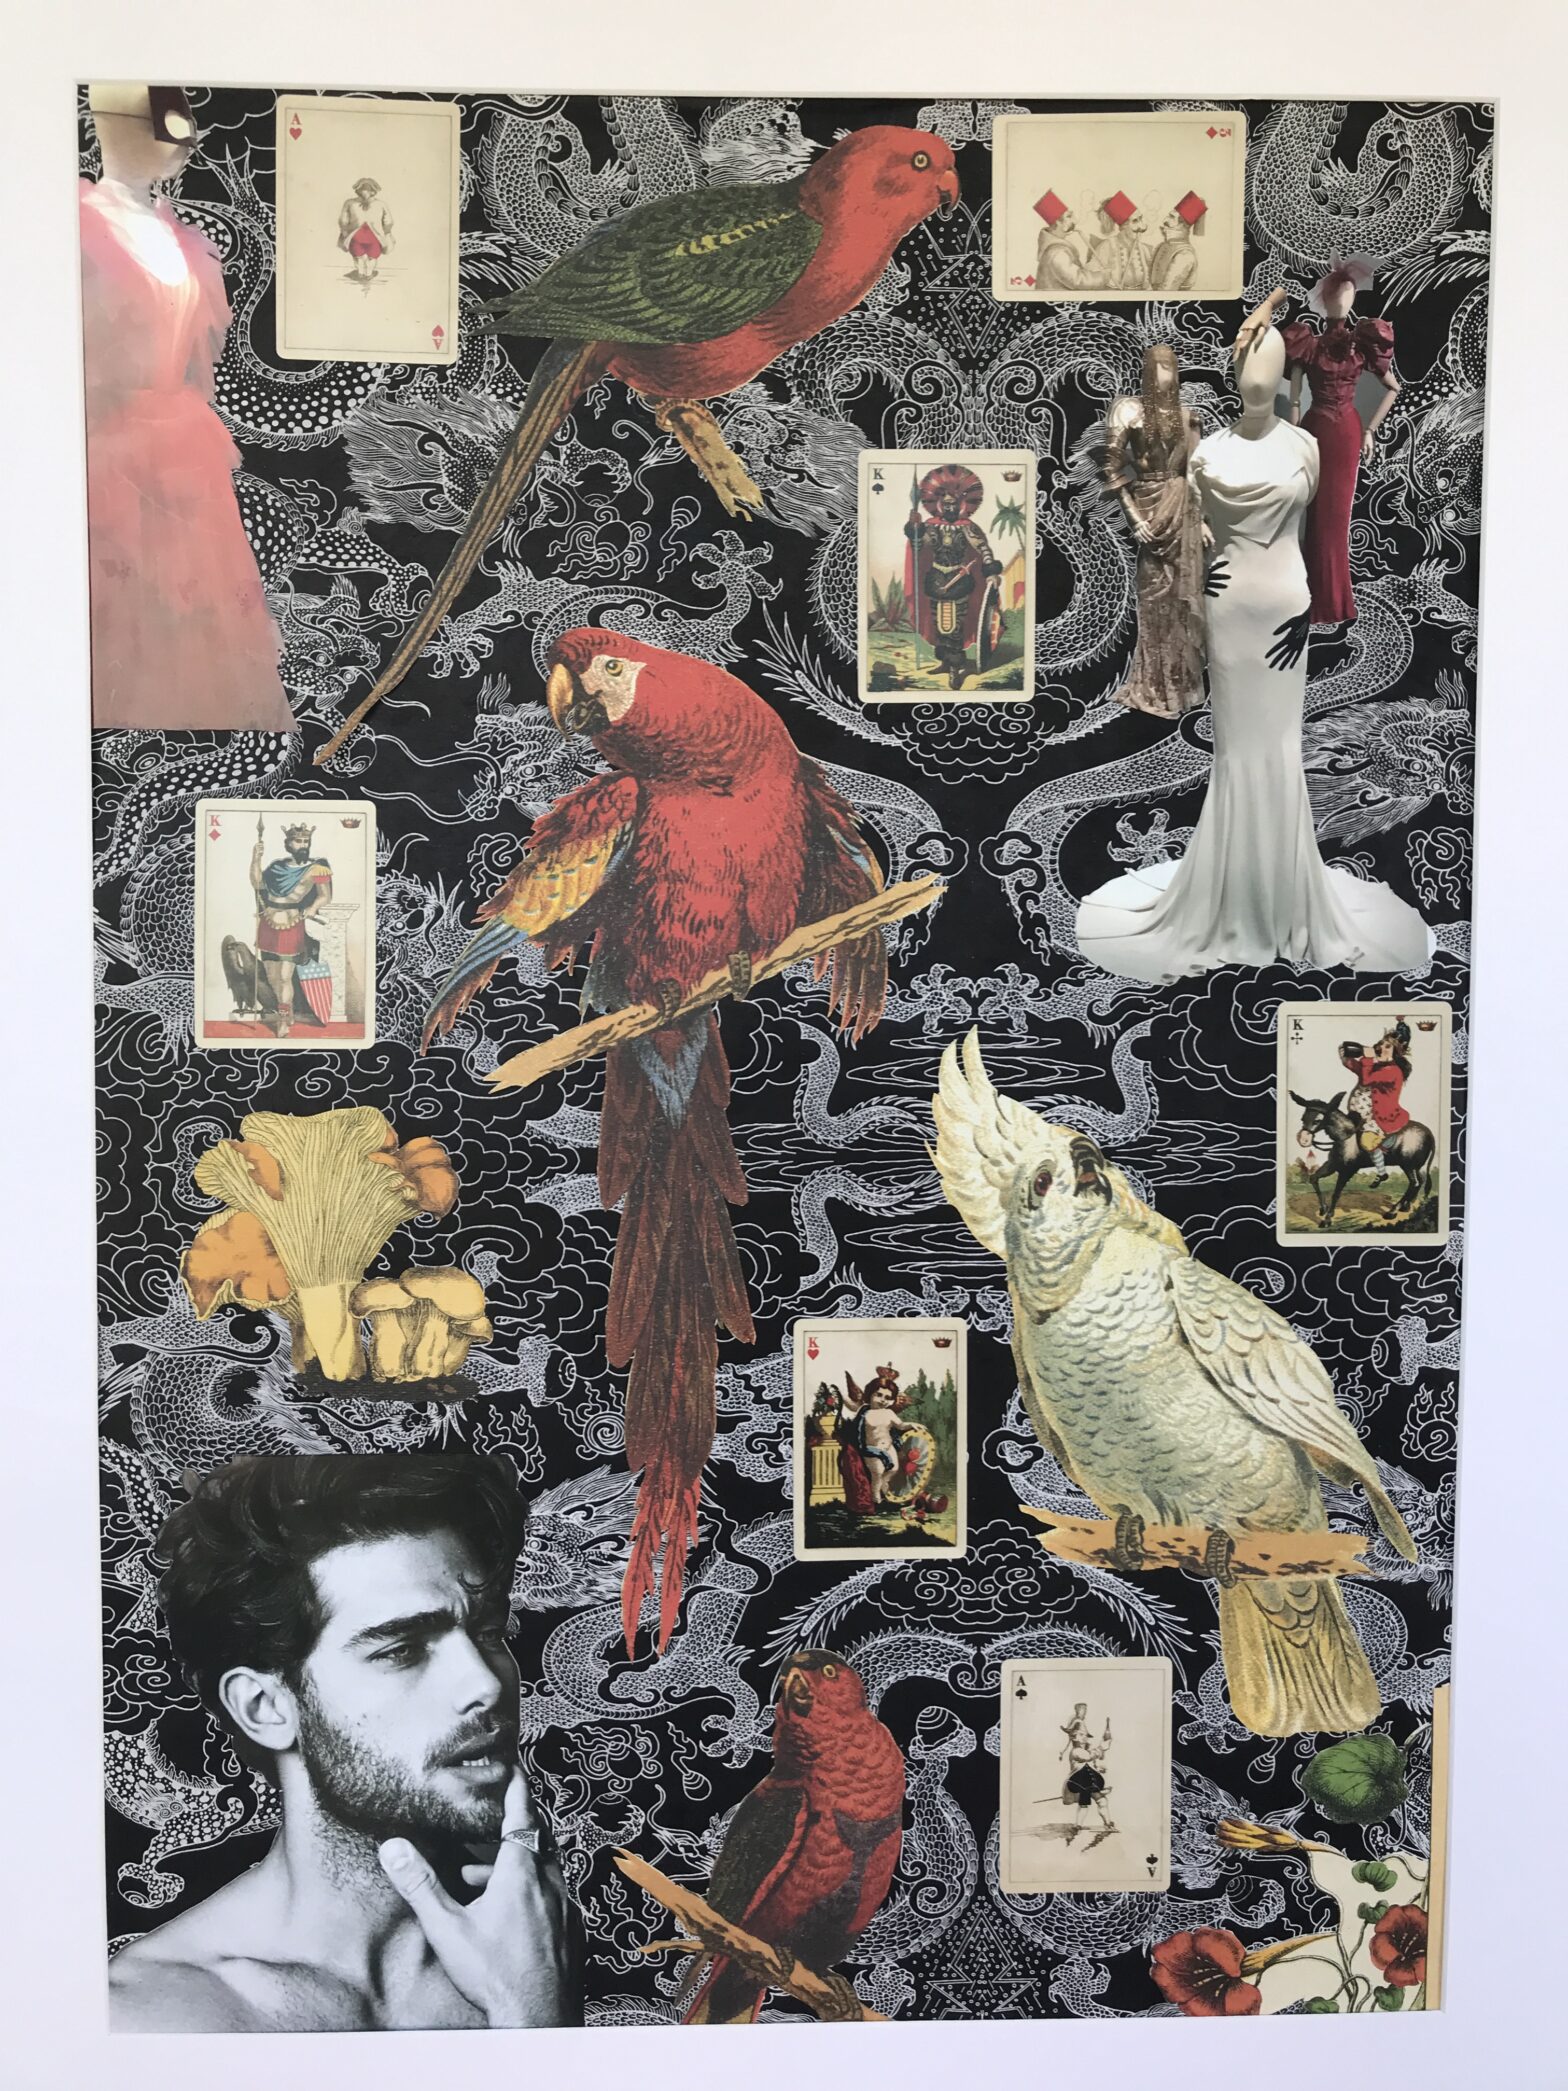 Collage featuring parrots, macaws, Christian Dior dresses, cards and men